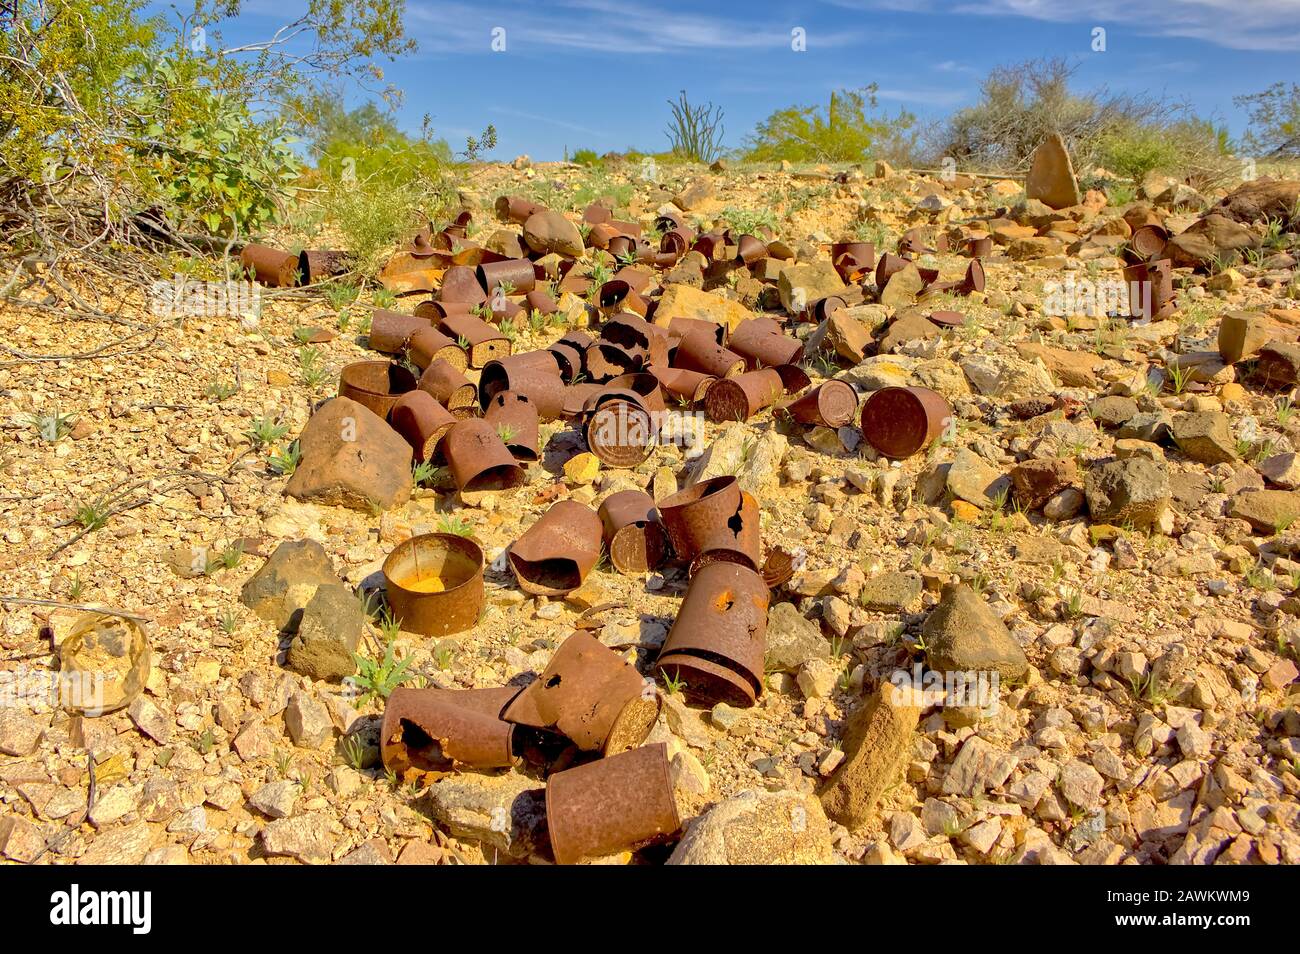 A pile of old rusty metal cans in the ghost town of Sundad Arizona. Sundad began in the 1920s as a TB Sanitarium, but when a viable treatment was foun Stock Photo